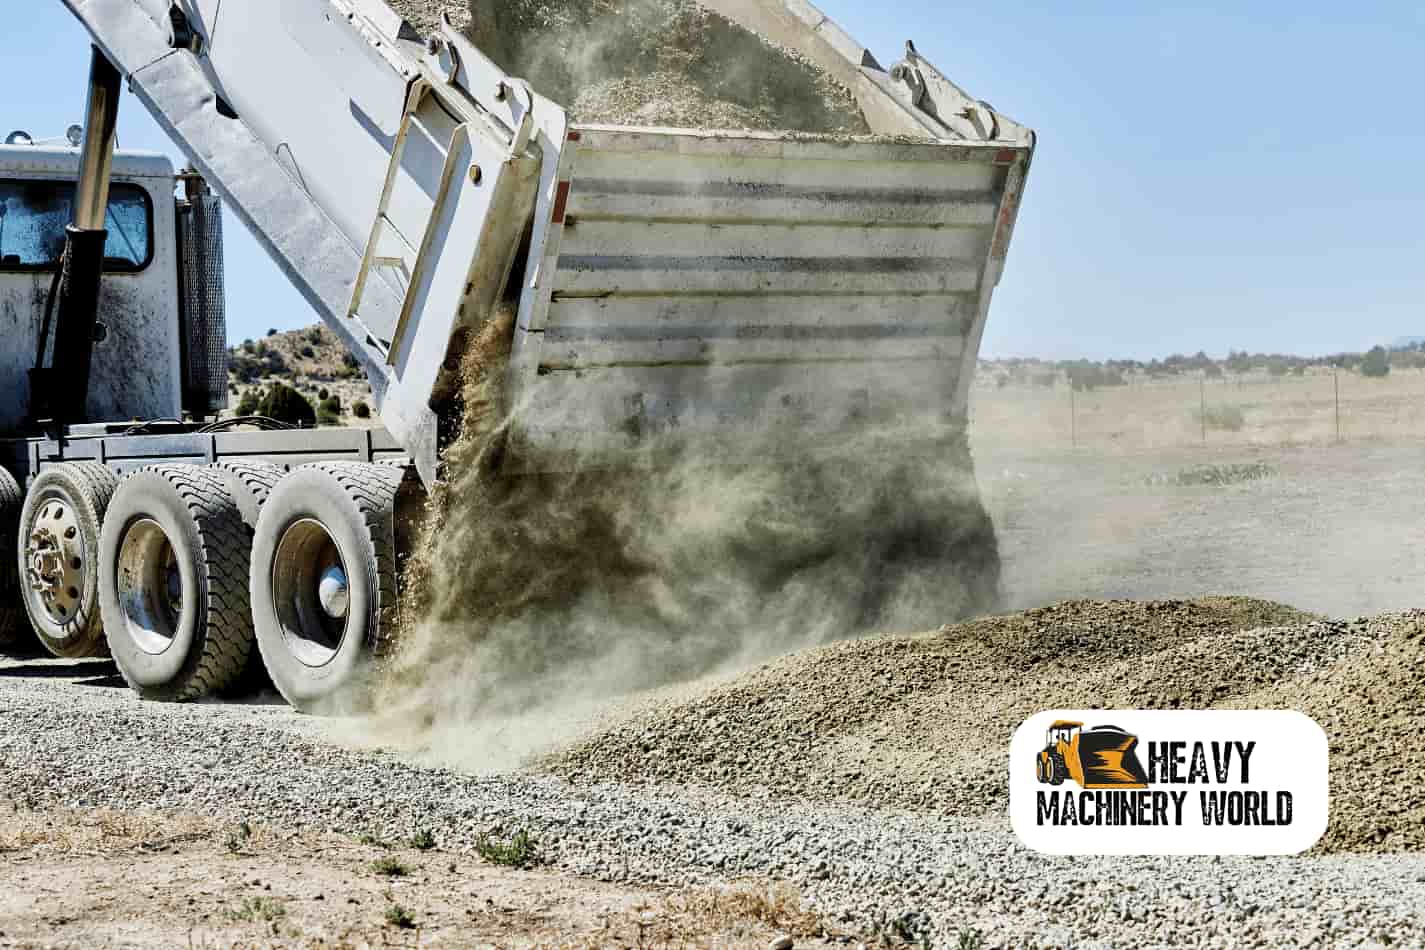 Dump Trucks: What License Is Needed To Drive Commercially